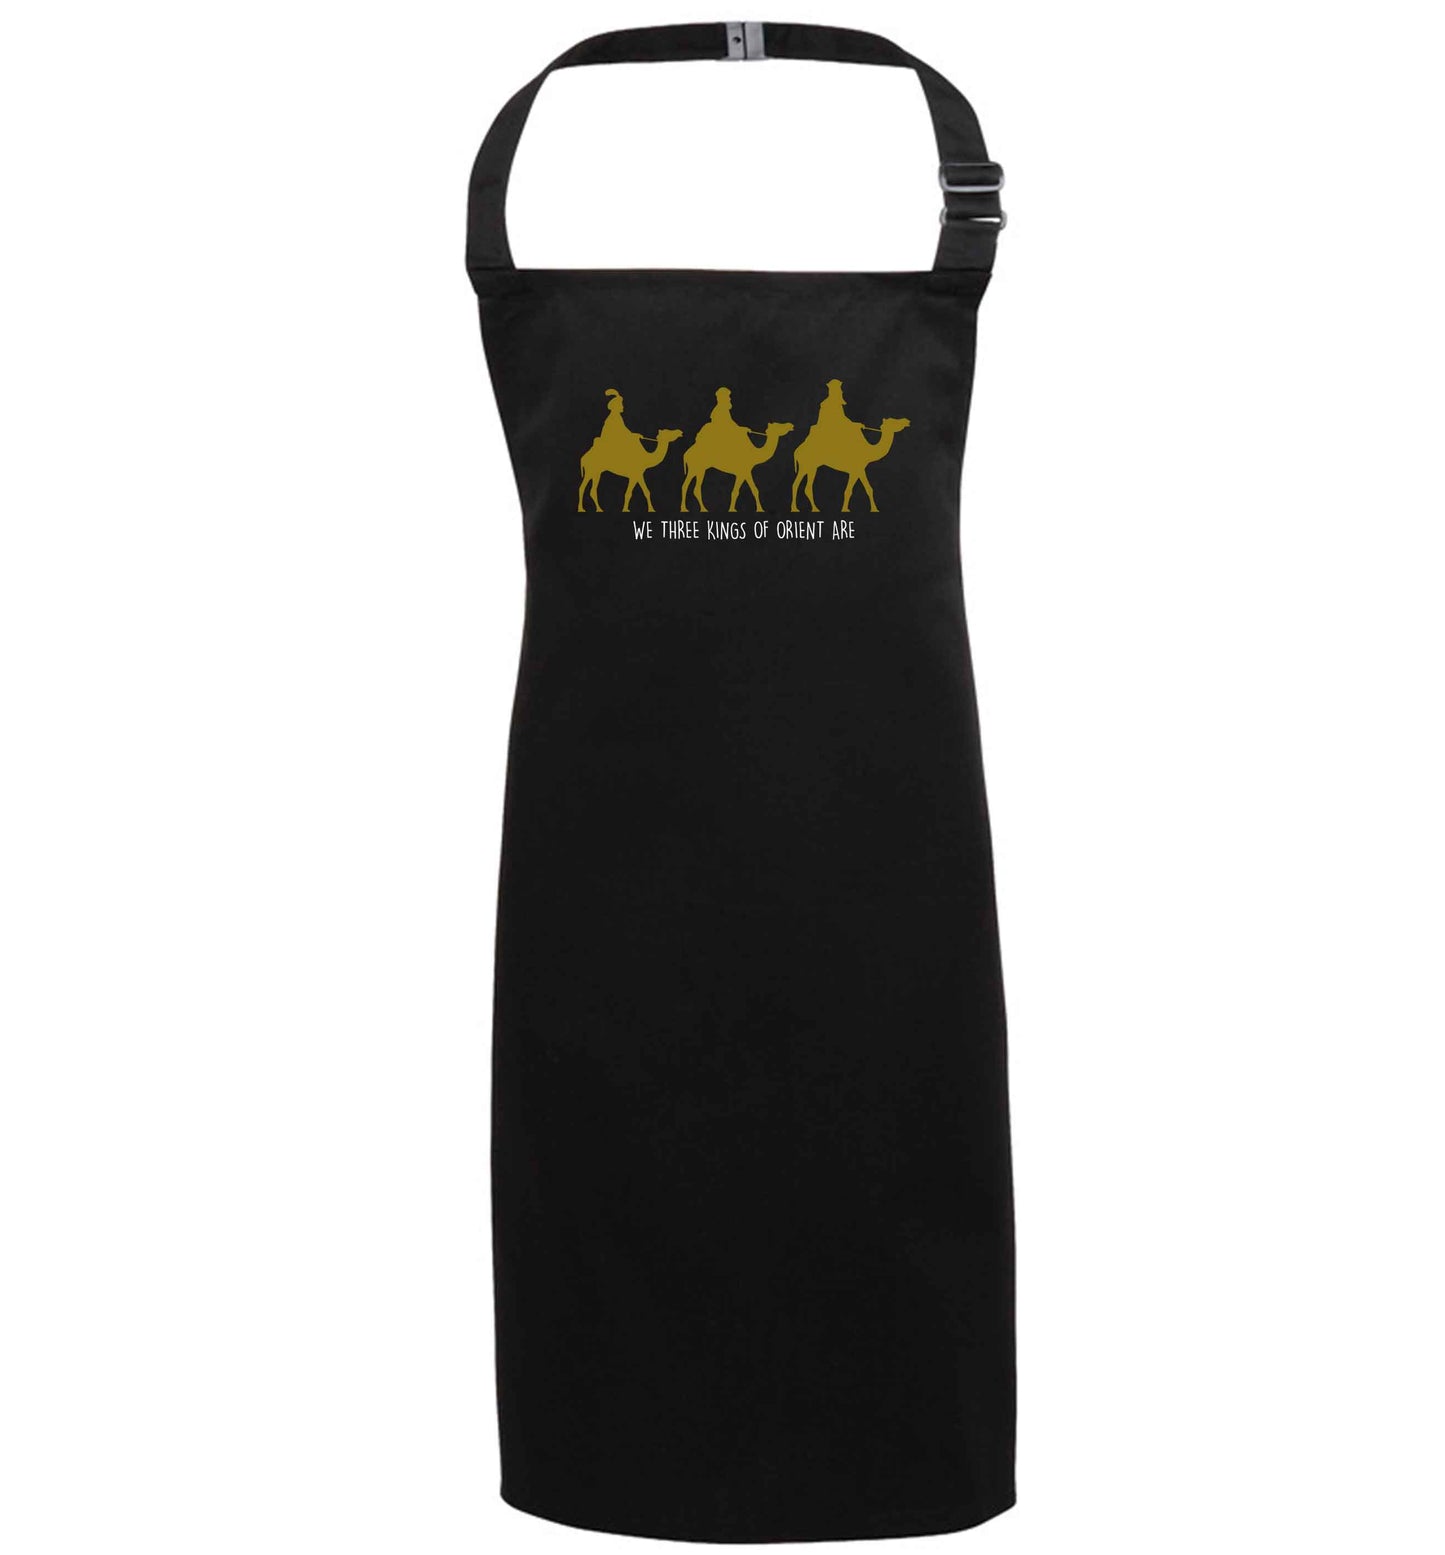 We three kings of orient are black apron 7-10 years